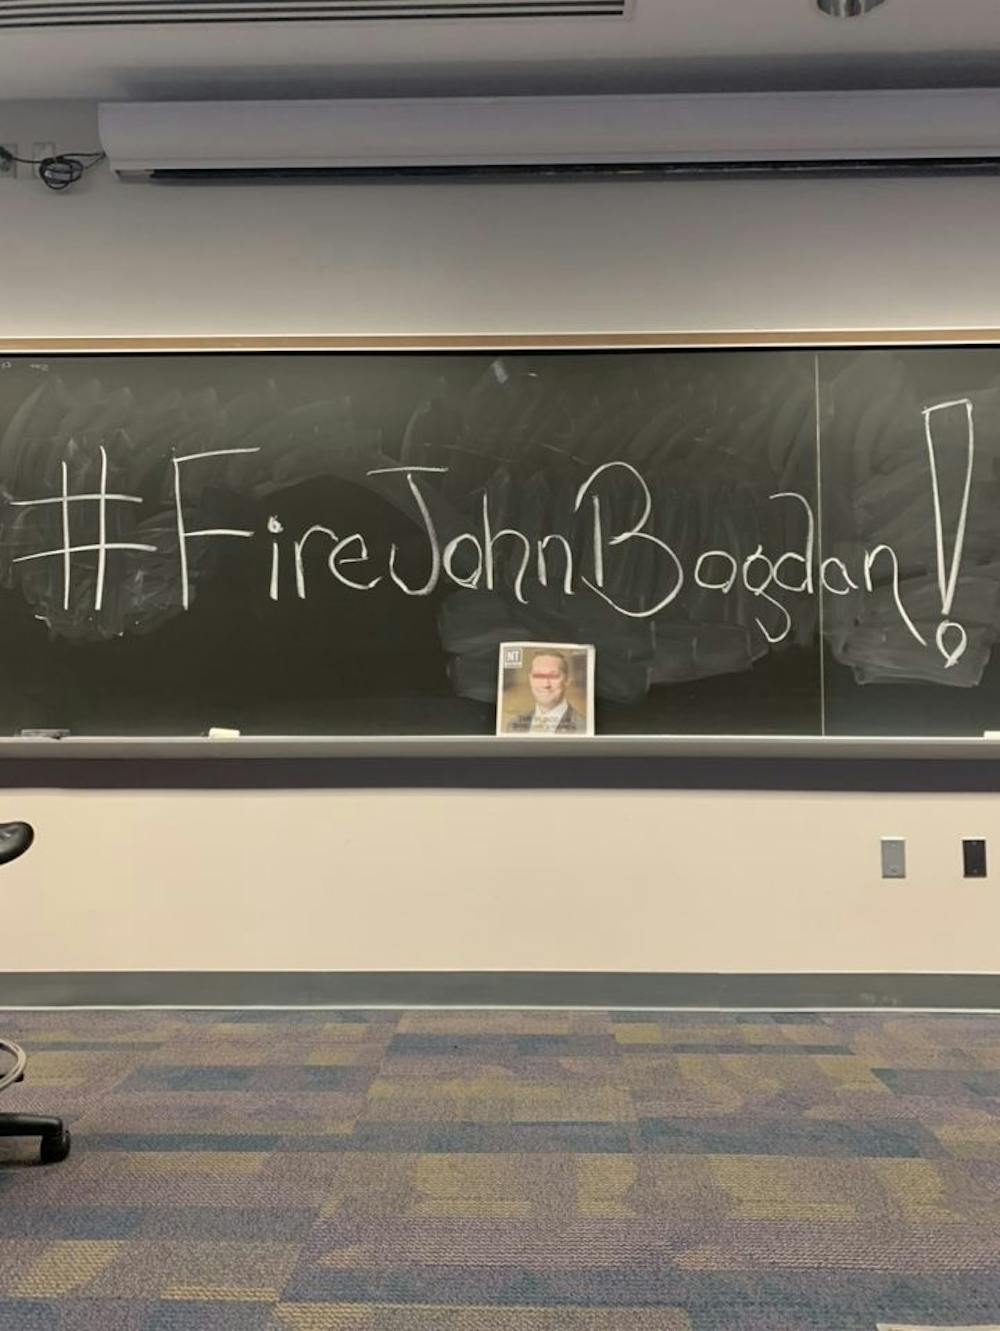 <p>Now, a coalition of anonymous students, faculty, staff and community members has called for the immediate removal of John Bogdan, the associate vice chancellor of safety and security at UNC-Charlotte. Photo courtesy of Coalition to Remove John Bogdan</p>